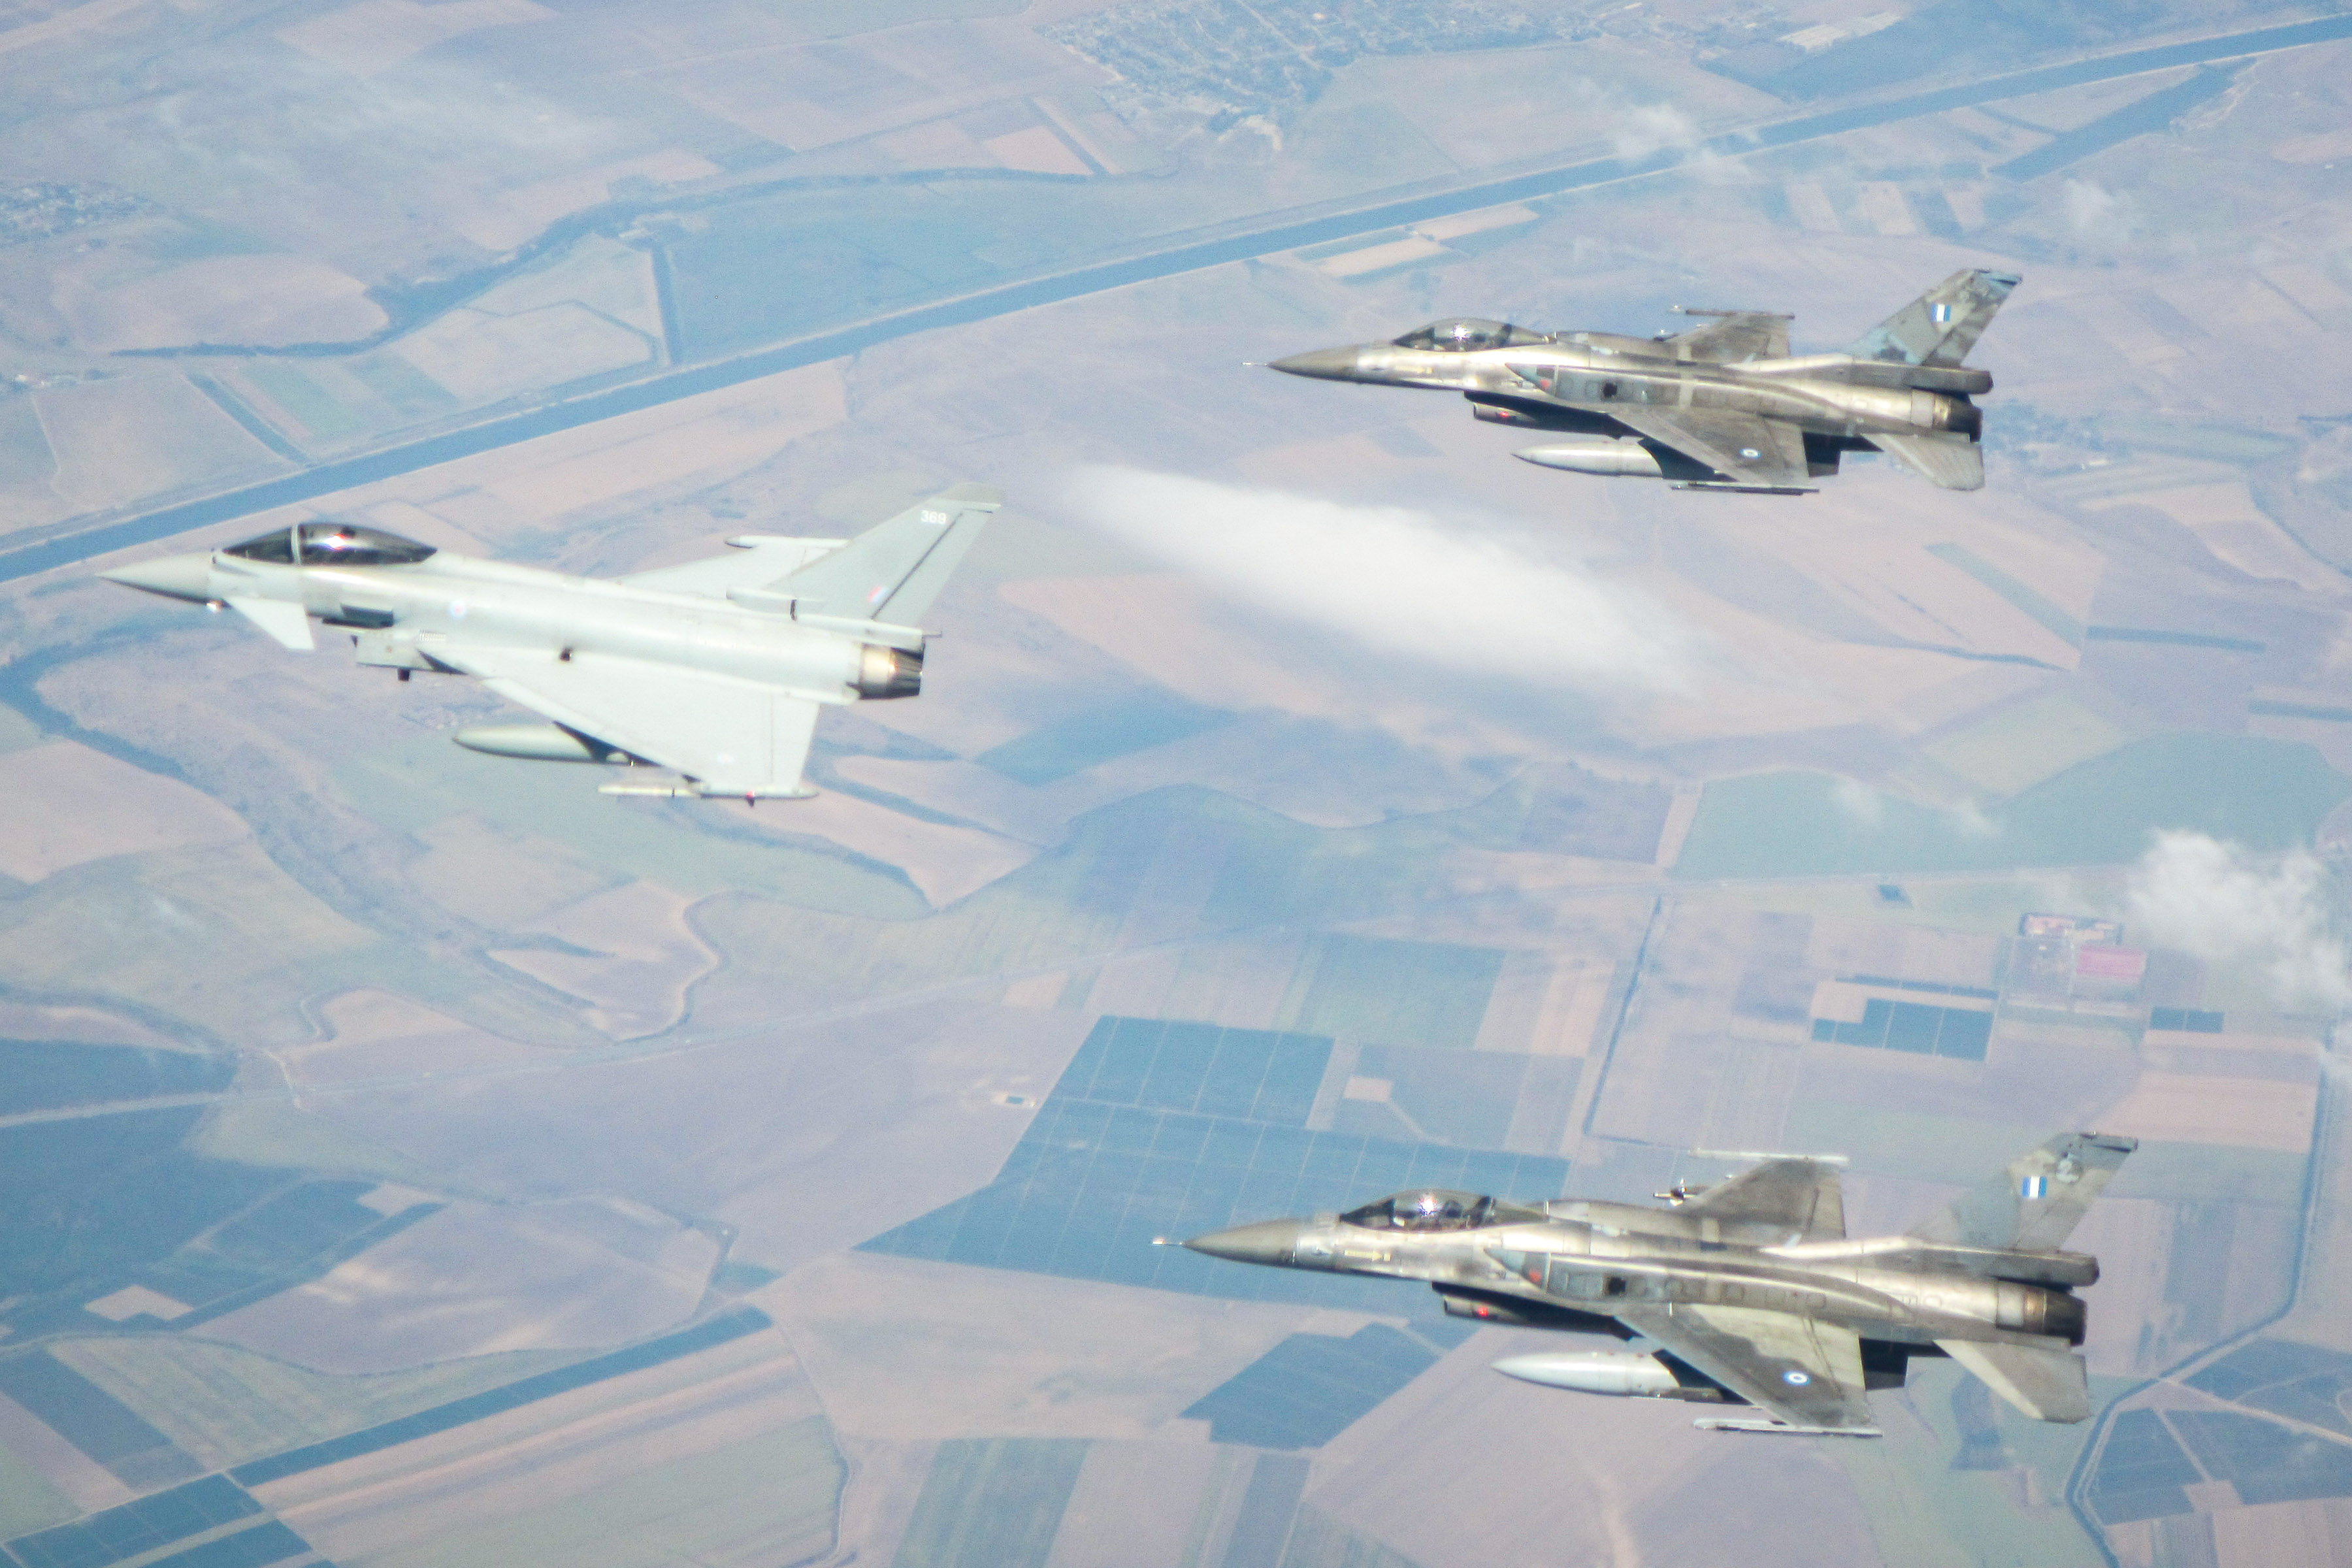 Image shows Typhoon aircraft in flight with two F-16's